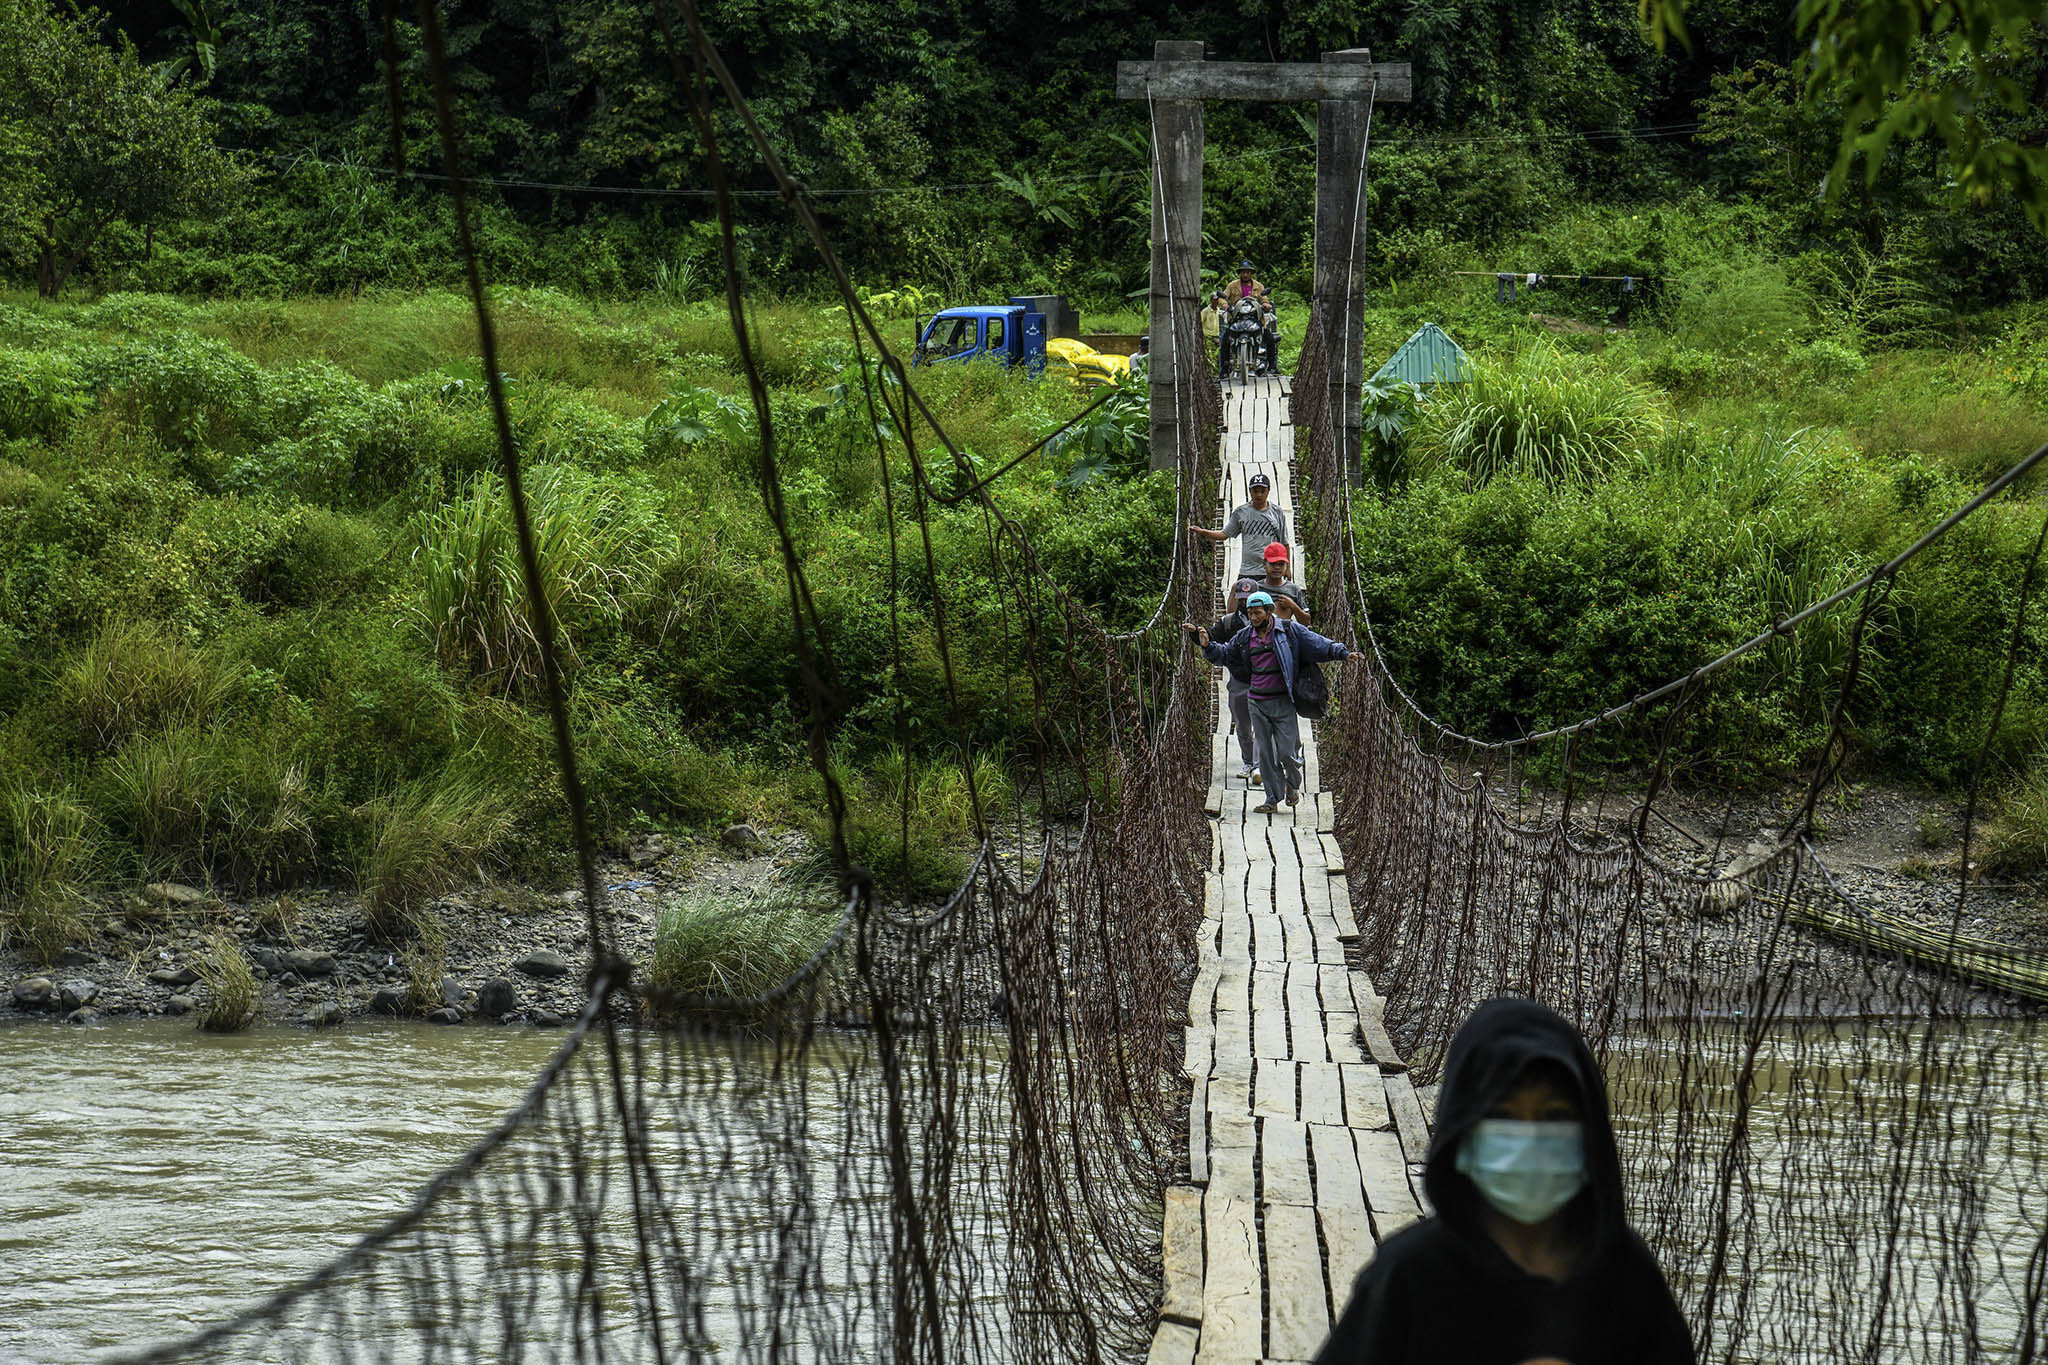 Refugees cross a suspension bridge from Myanmar into India on Oct. 16, 2021. The Myanmar military’s scorched earth warfare is creating chaos on the India border. (Atul Loke/The New York Times)